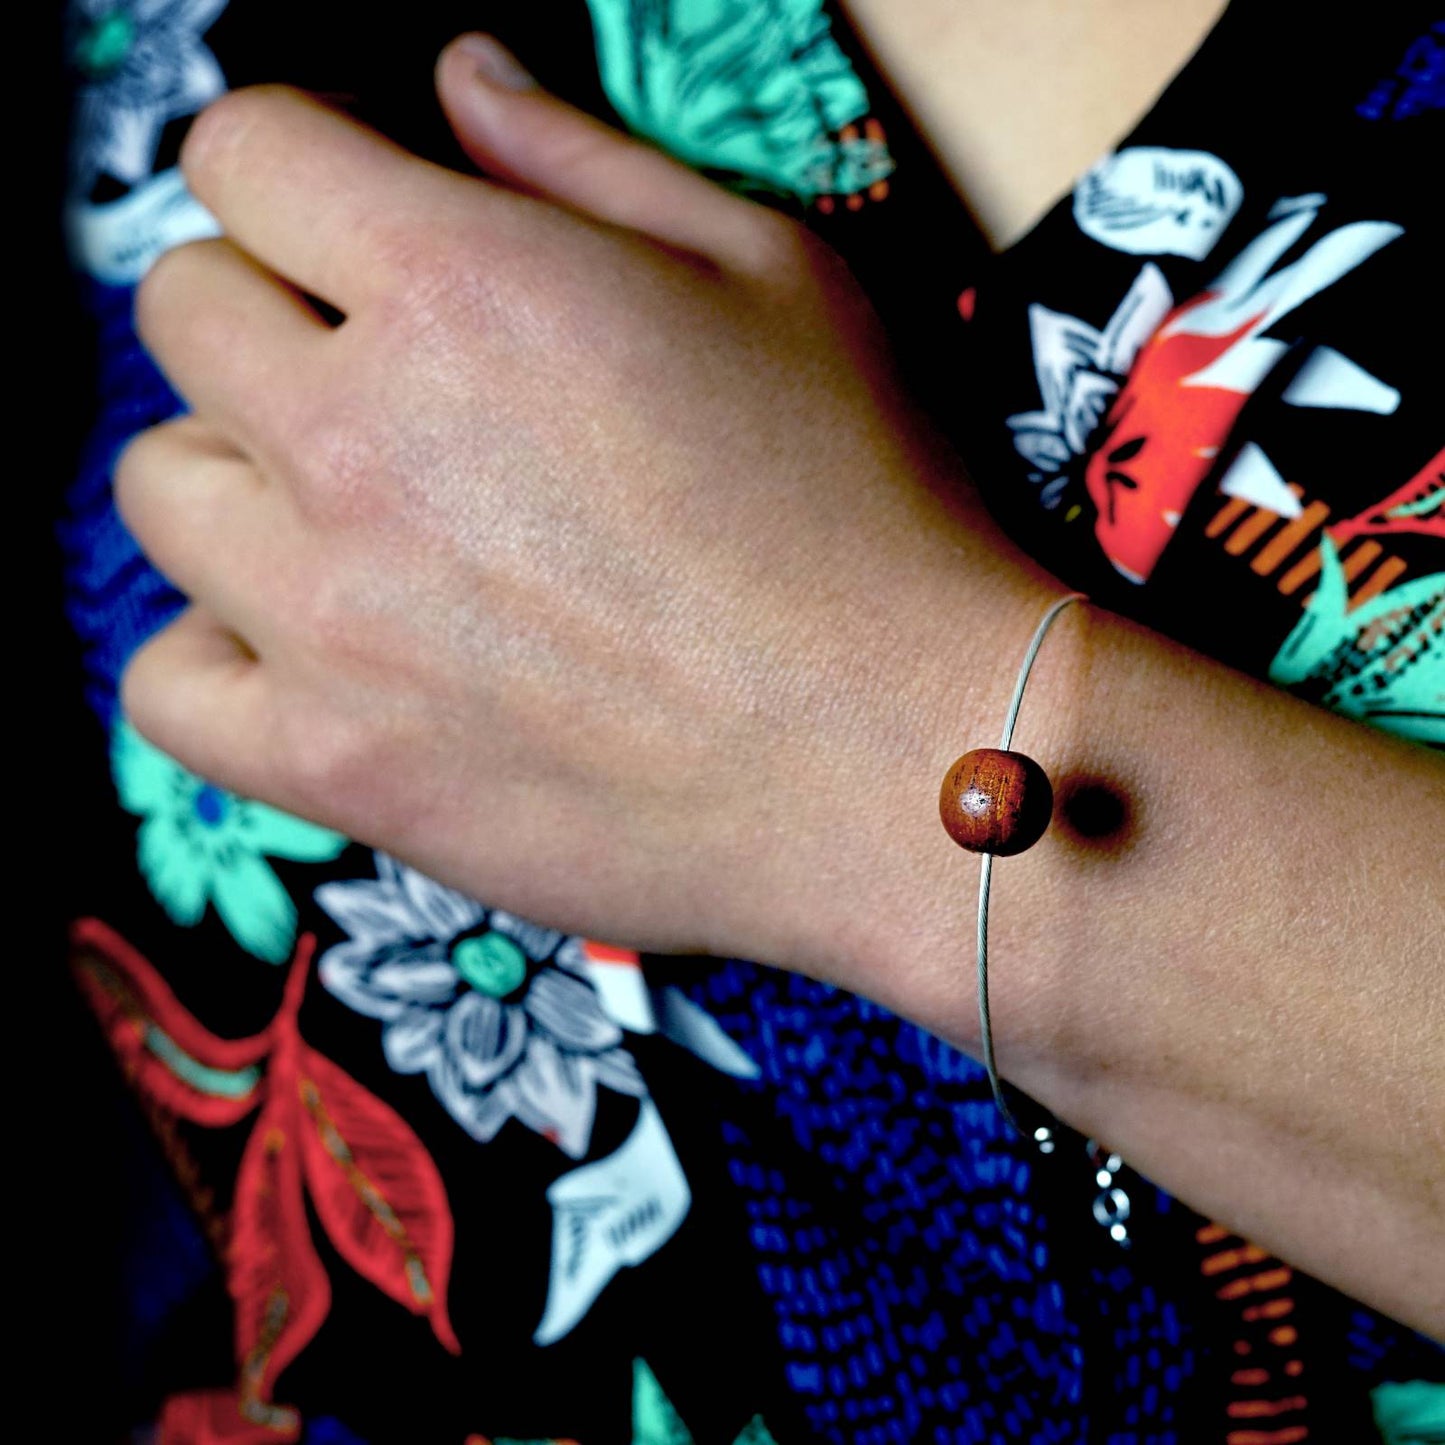 Load image into Gallery viewer, Lana Red Wood Bead on Silver Cable Bracelet worn on arm Unisex jewellery, vegan range by Silverwood Jewellery
